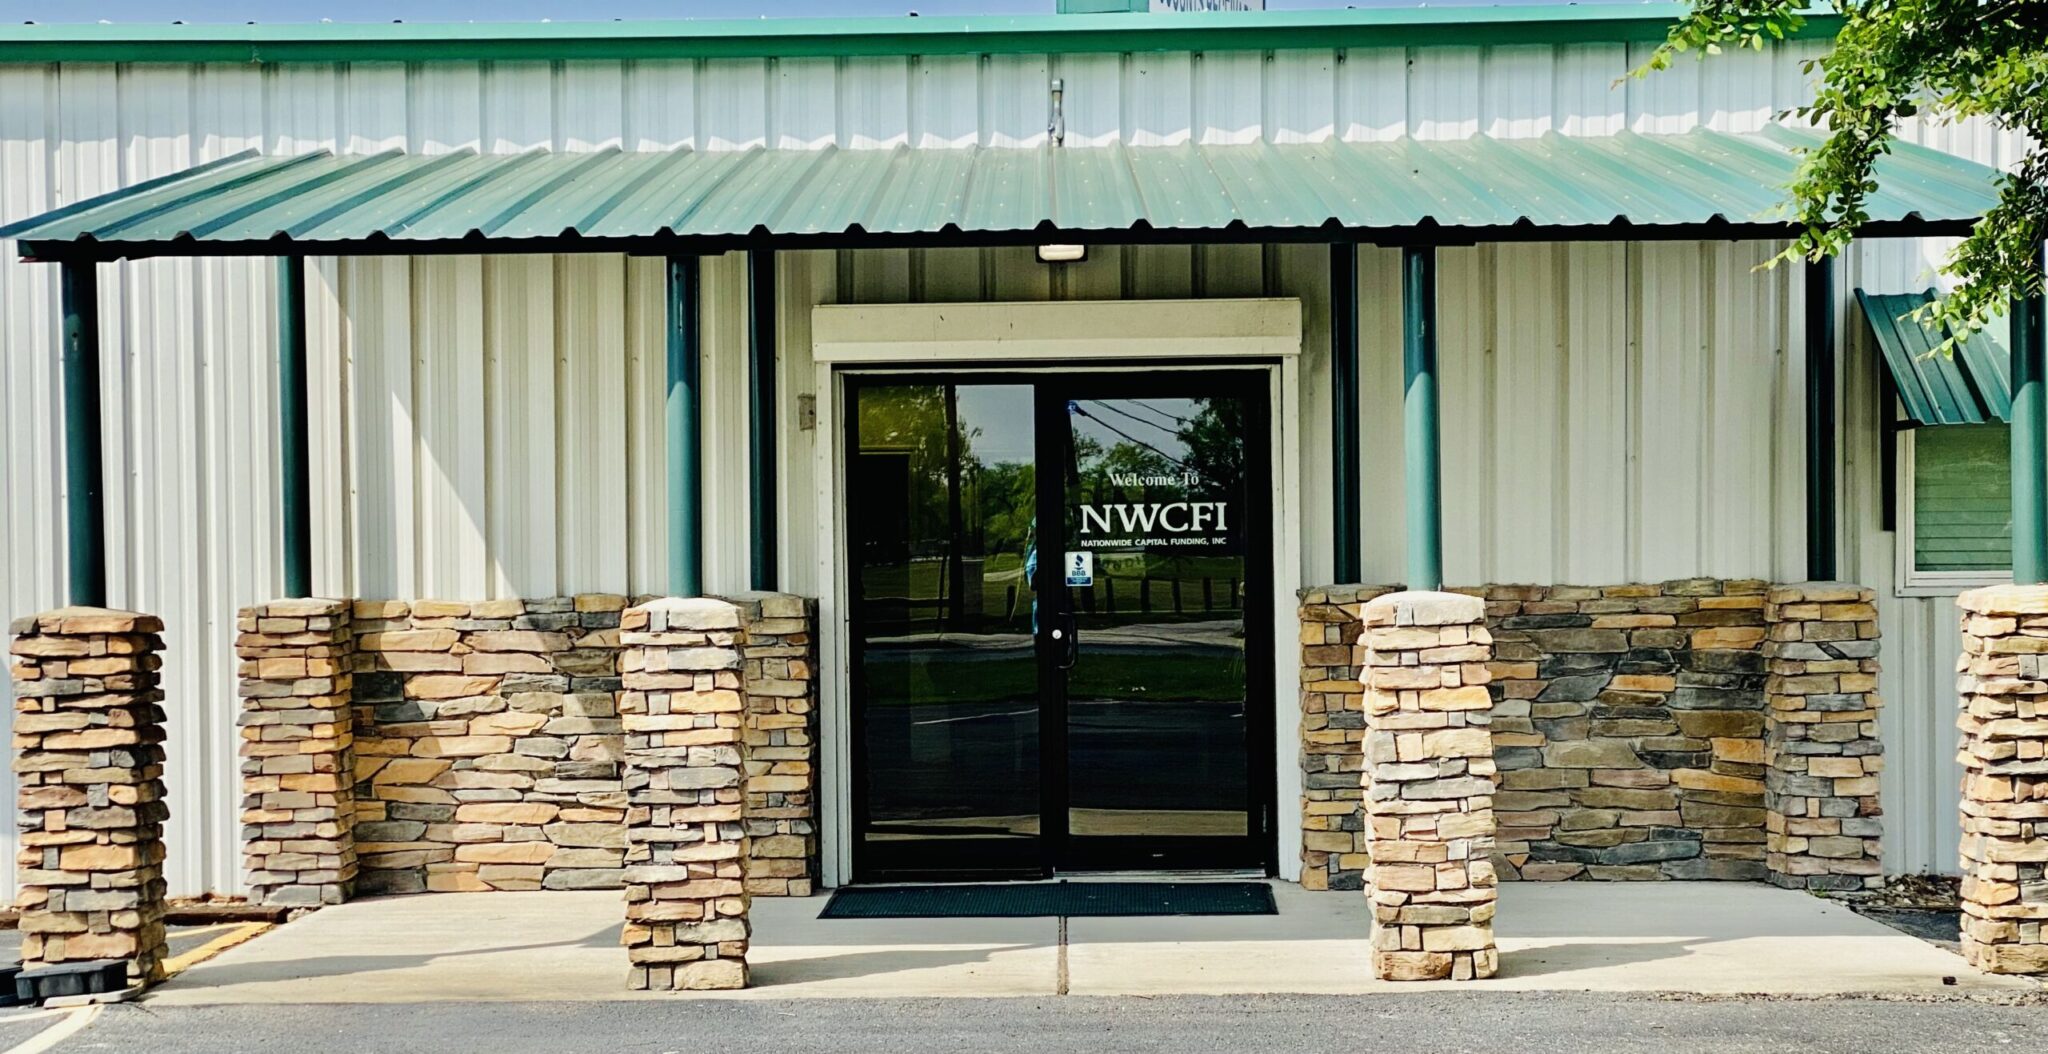 NWCFI Front View